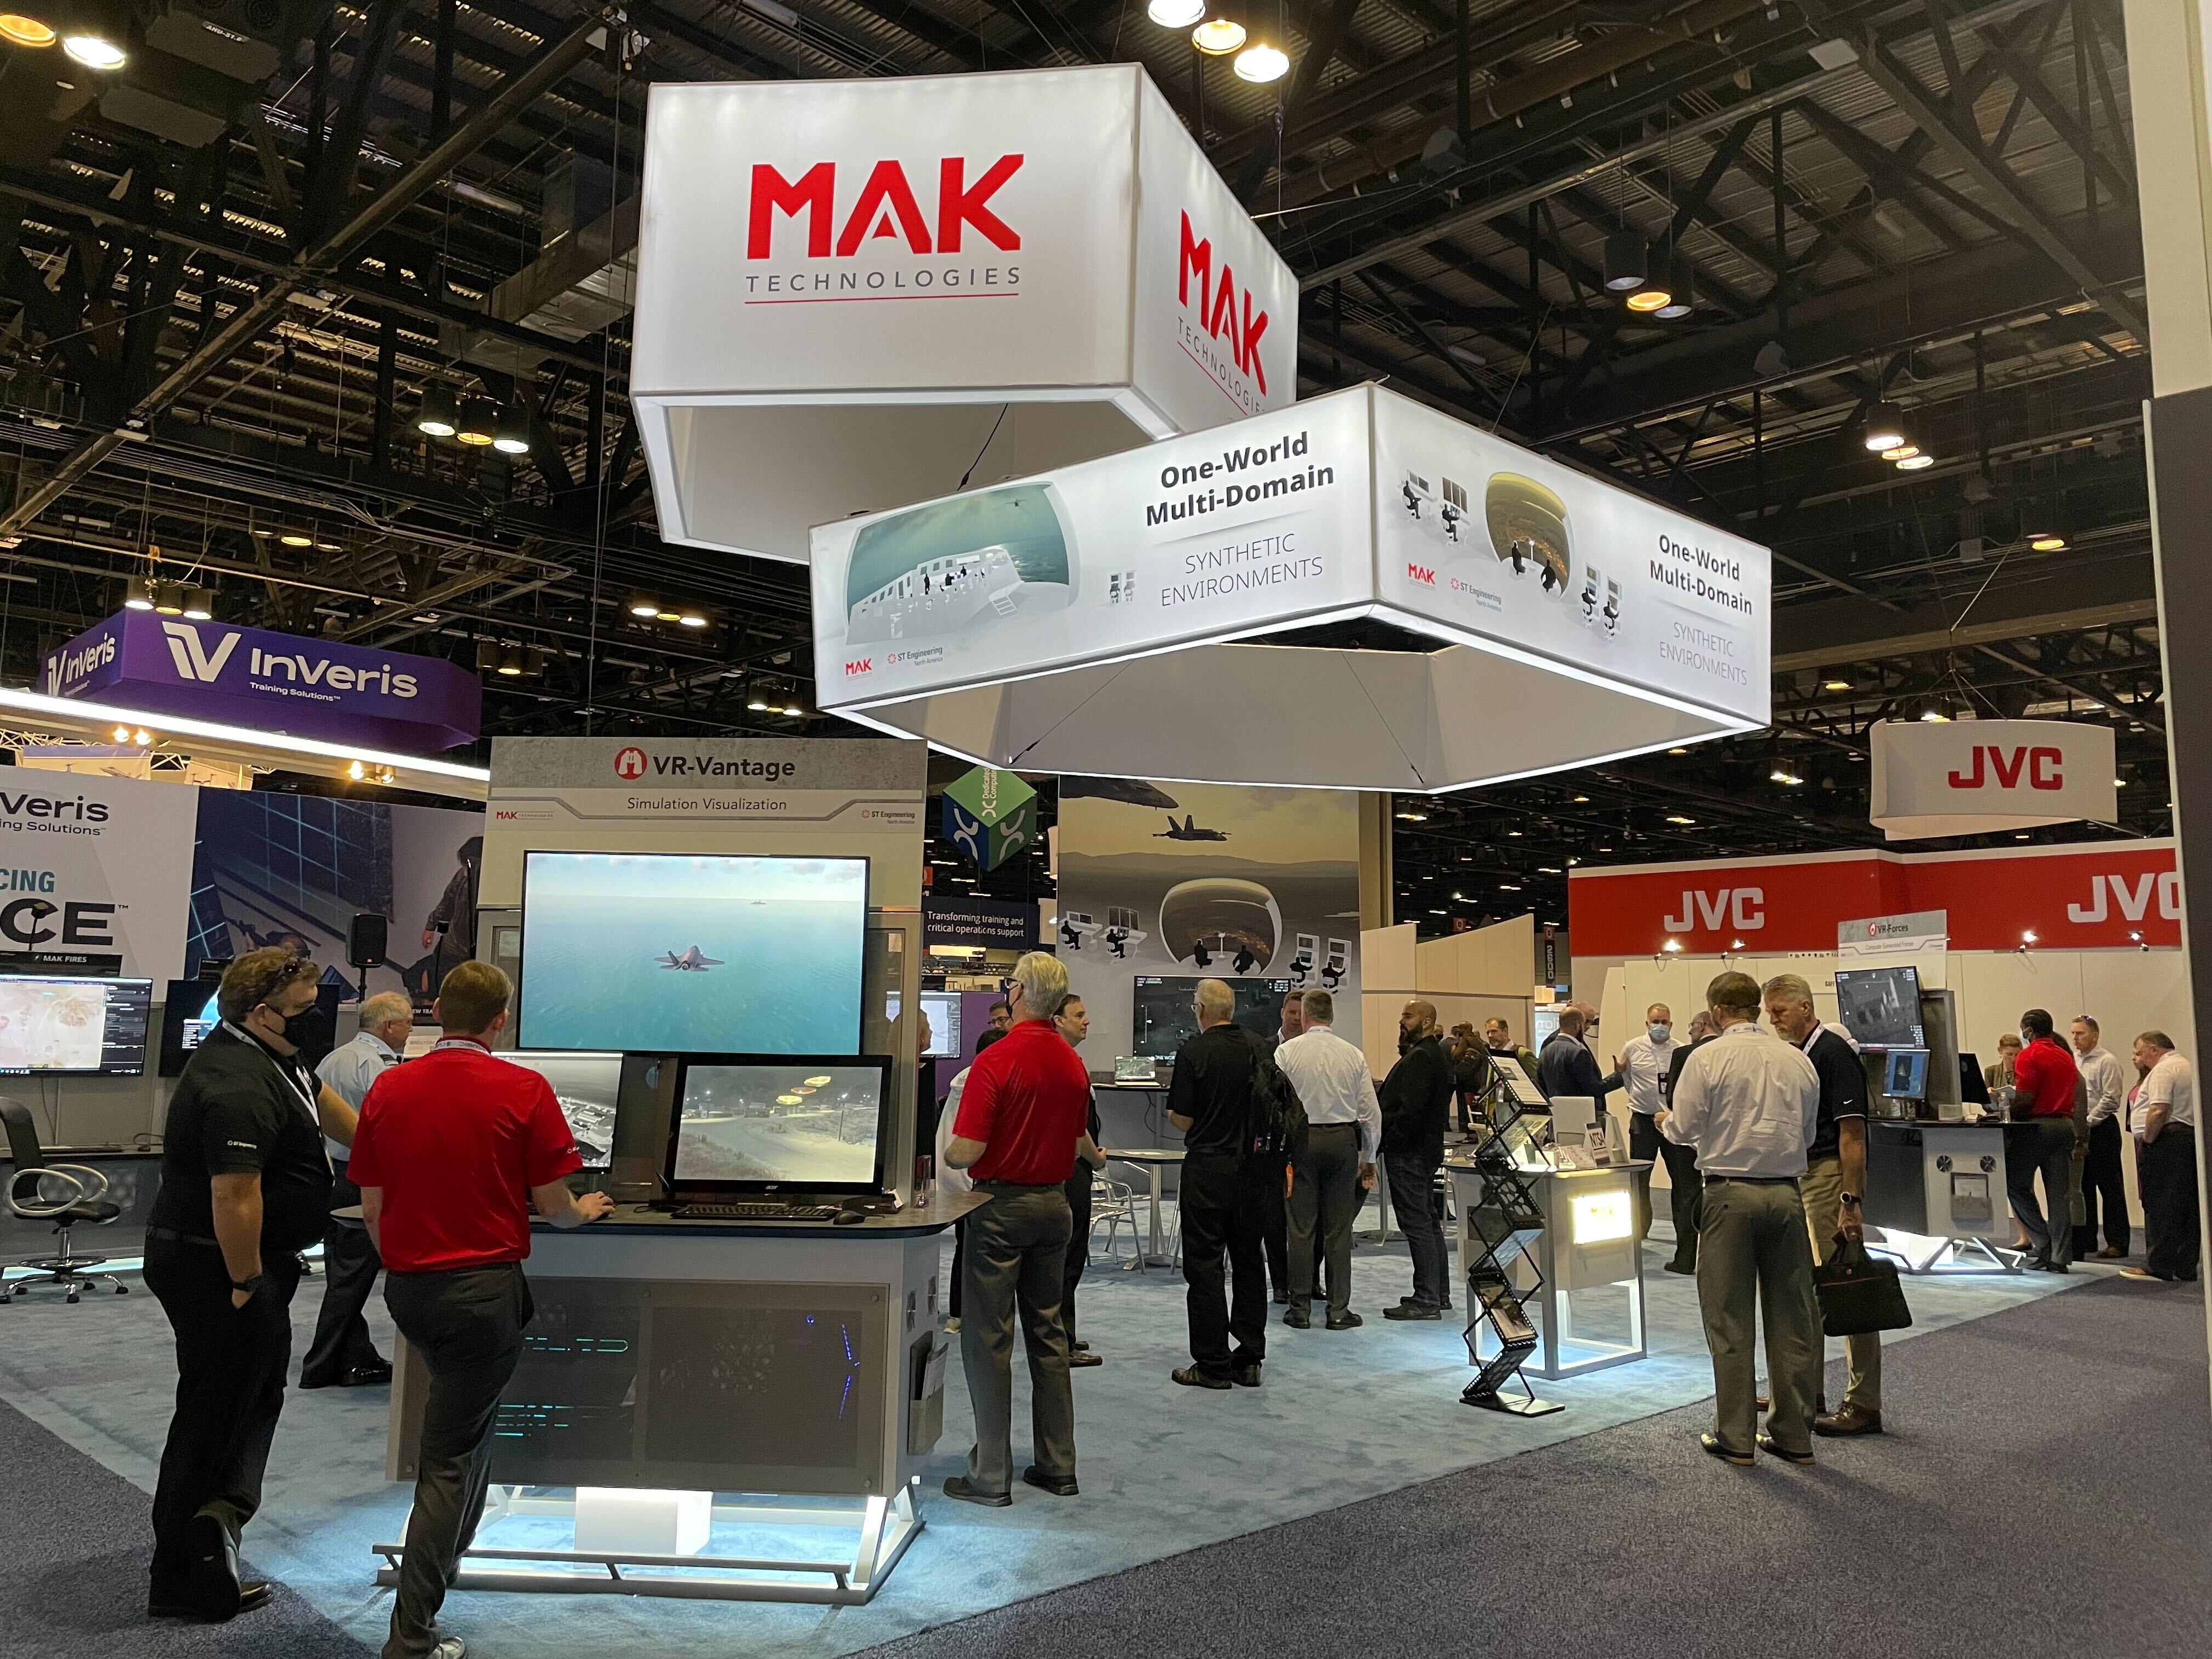 Blog: The countdown to I/ITSEC 2022 is on! Here's what you’ll see at MAK booth #1413.